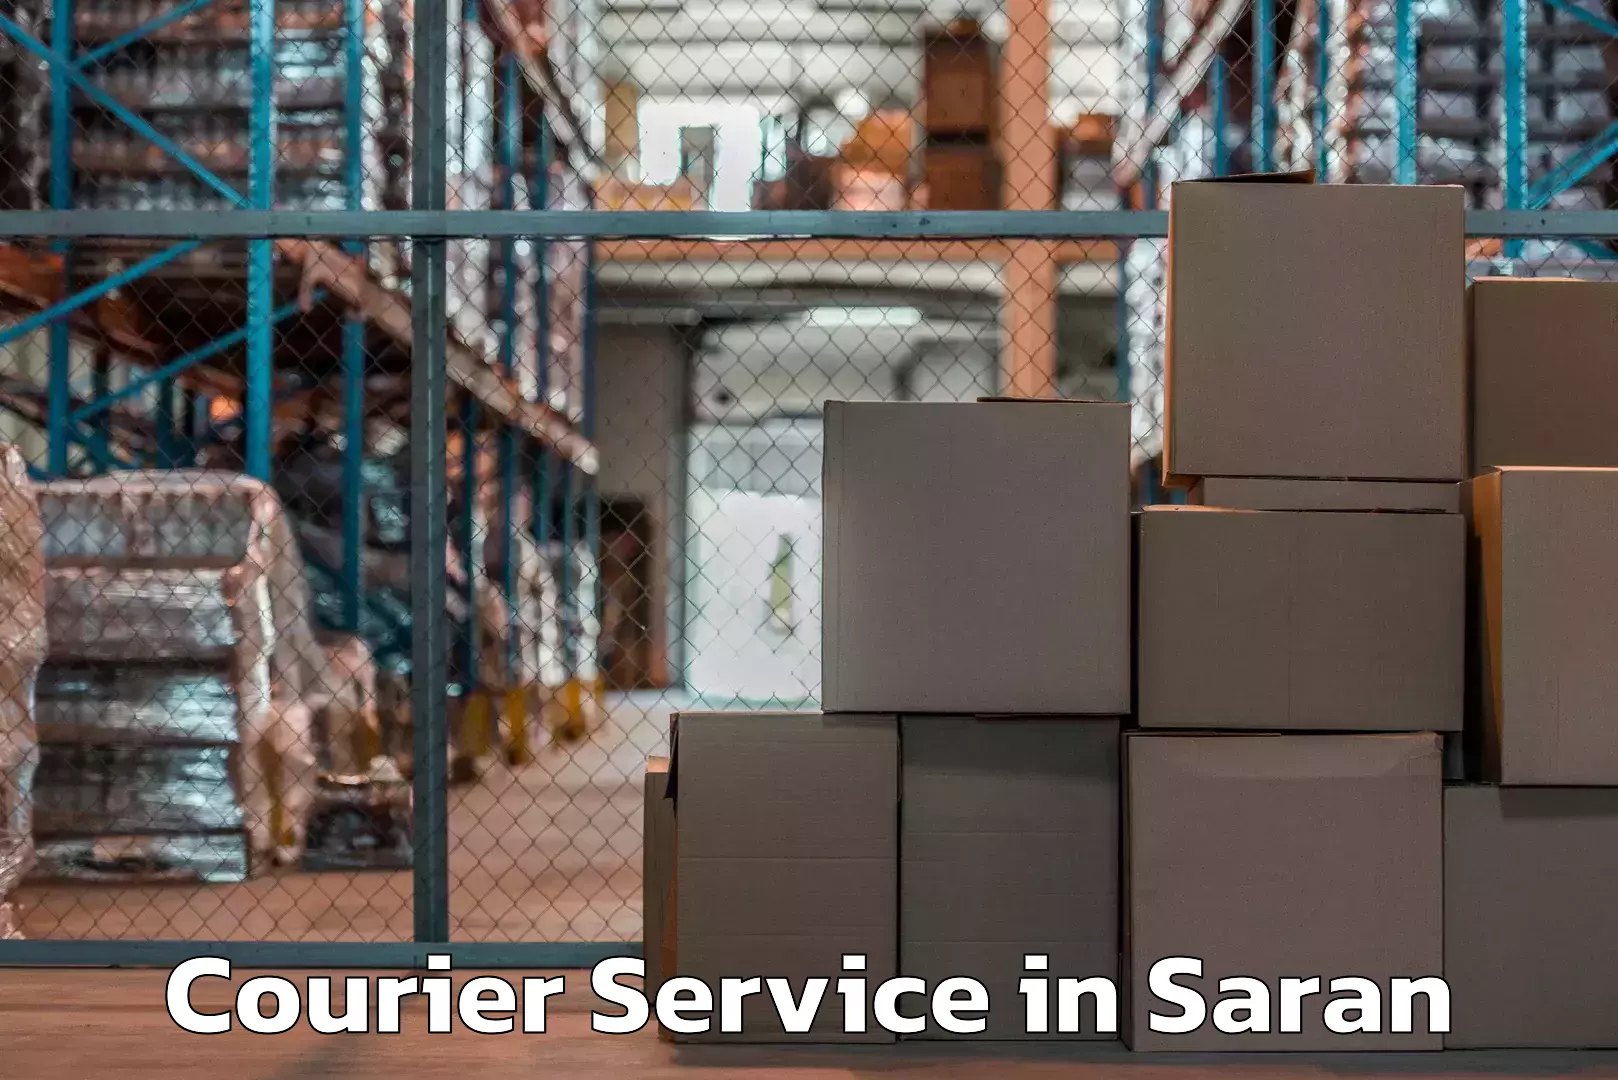 Sustainable delivery practices in Saran